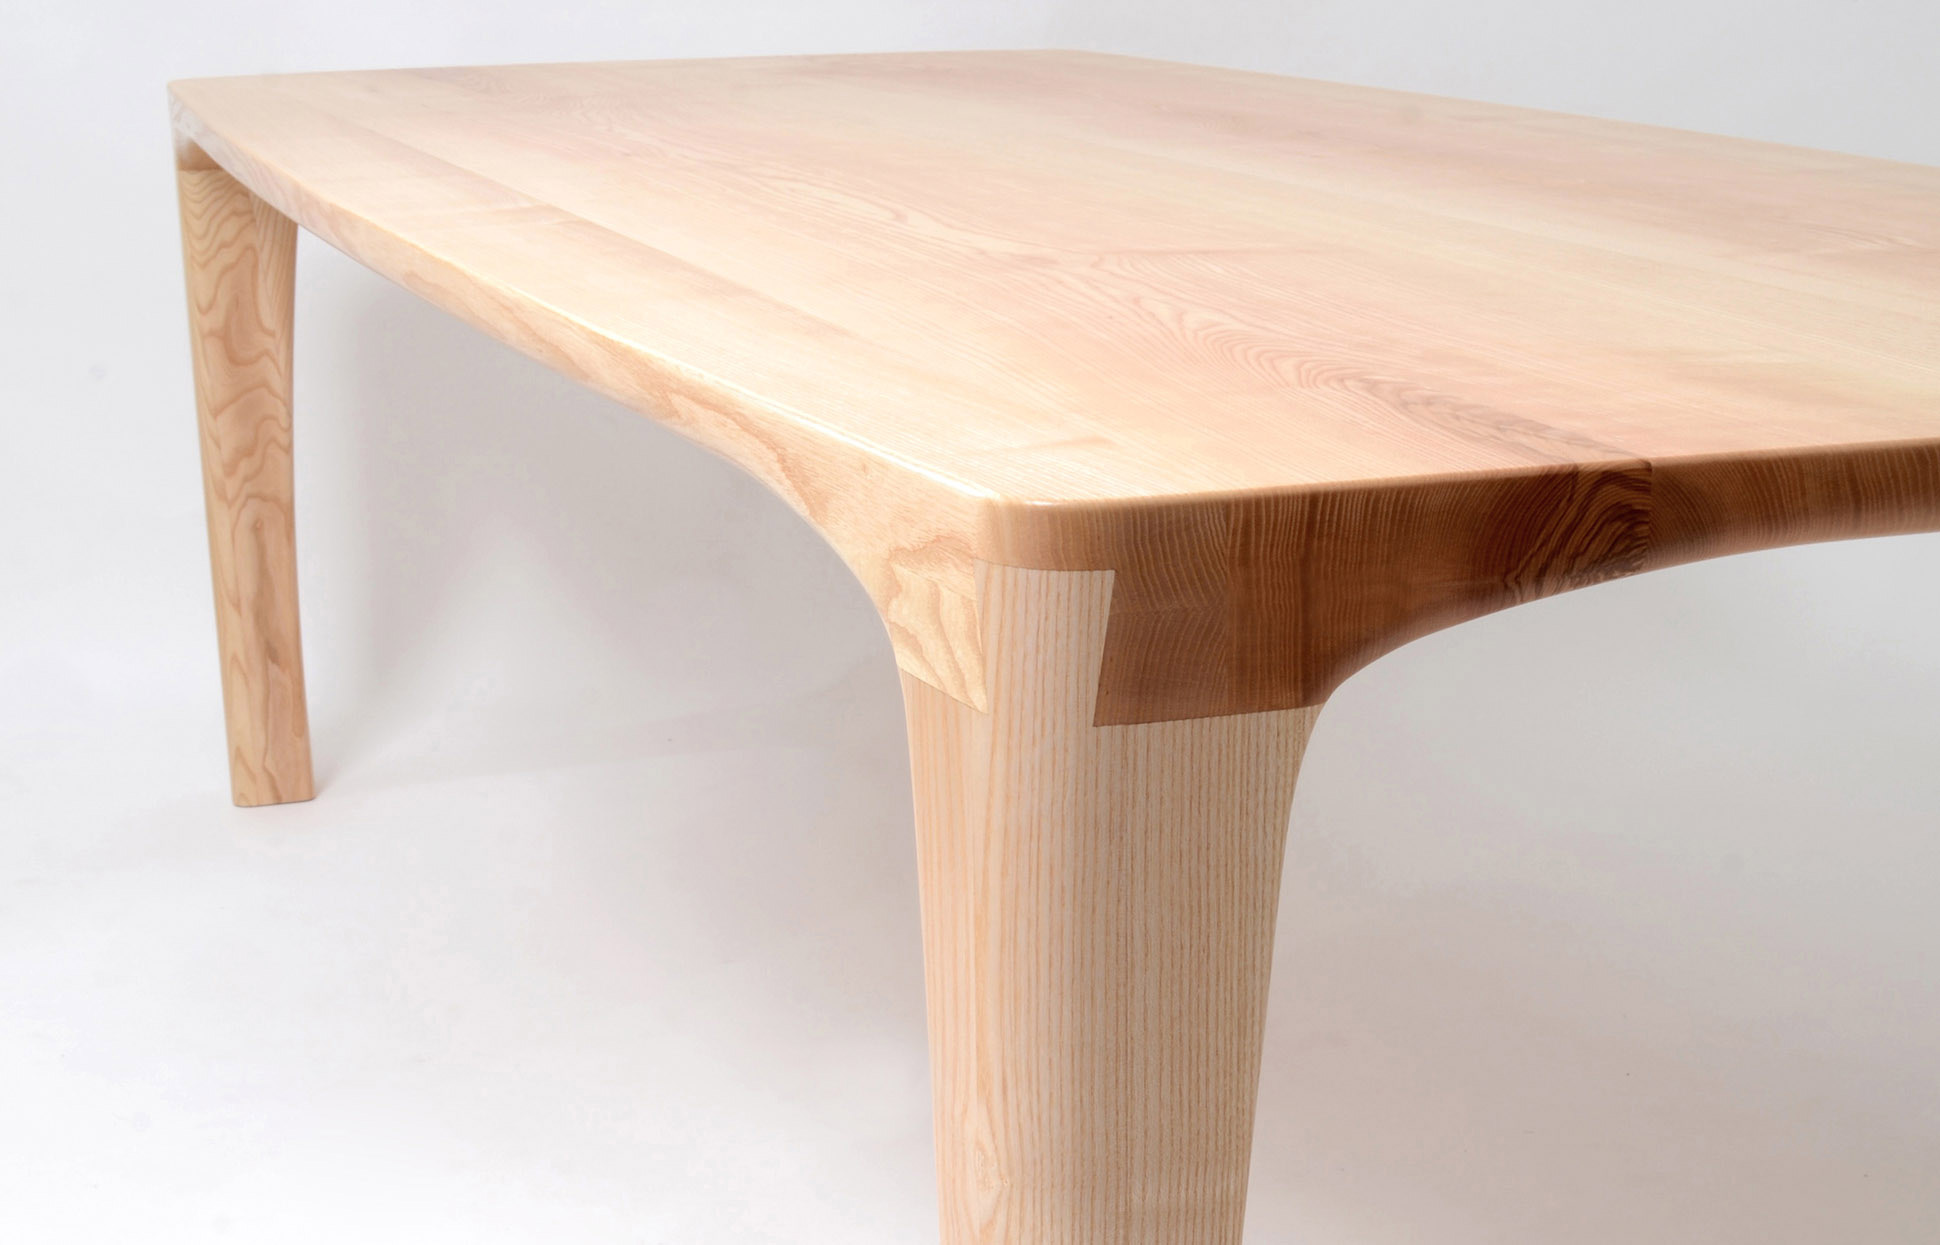 Shaw - A bespoke dining table